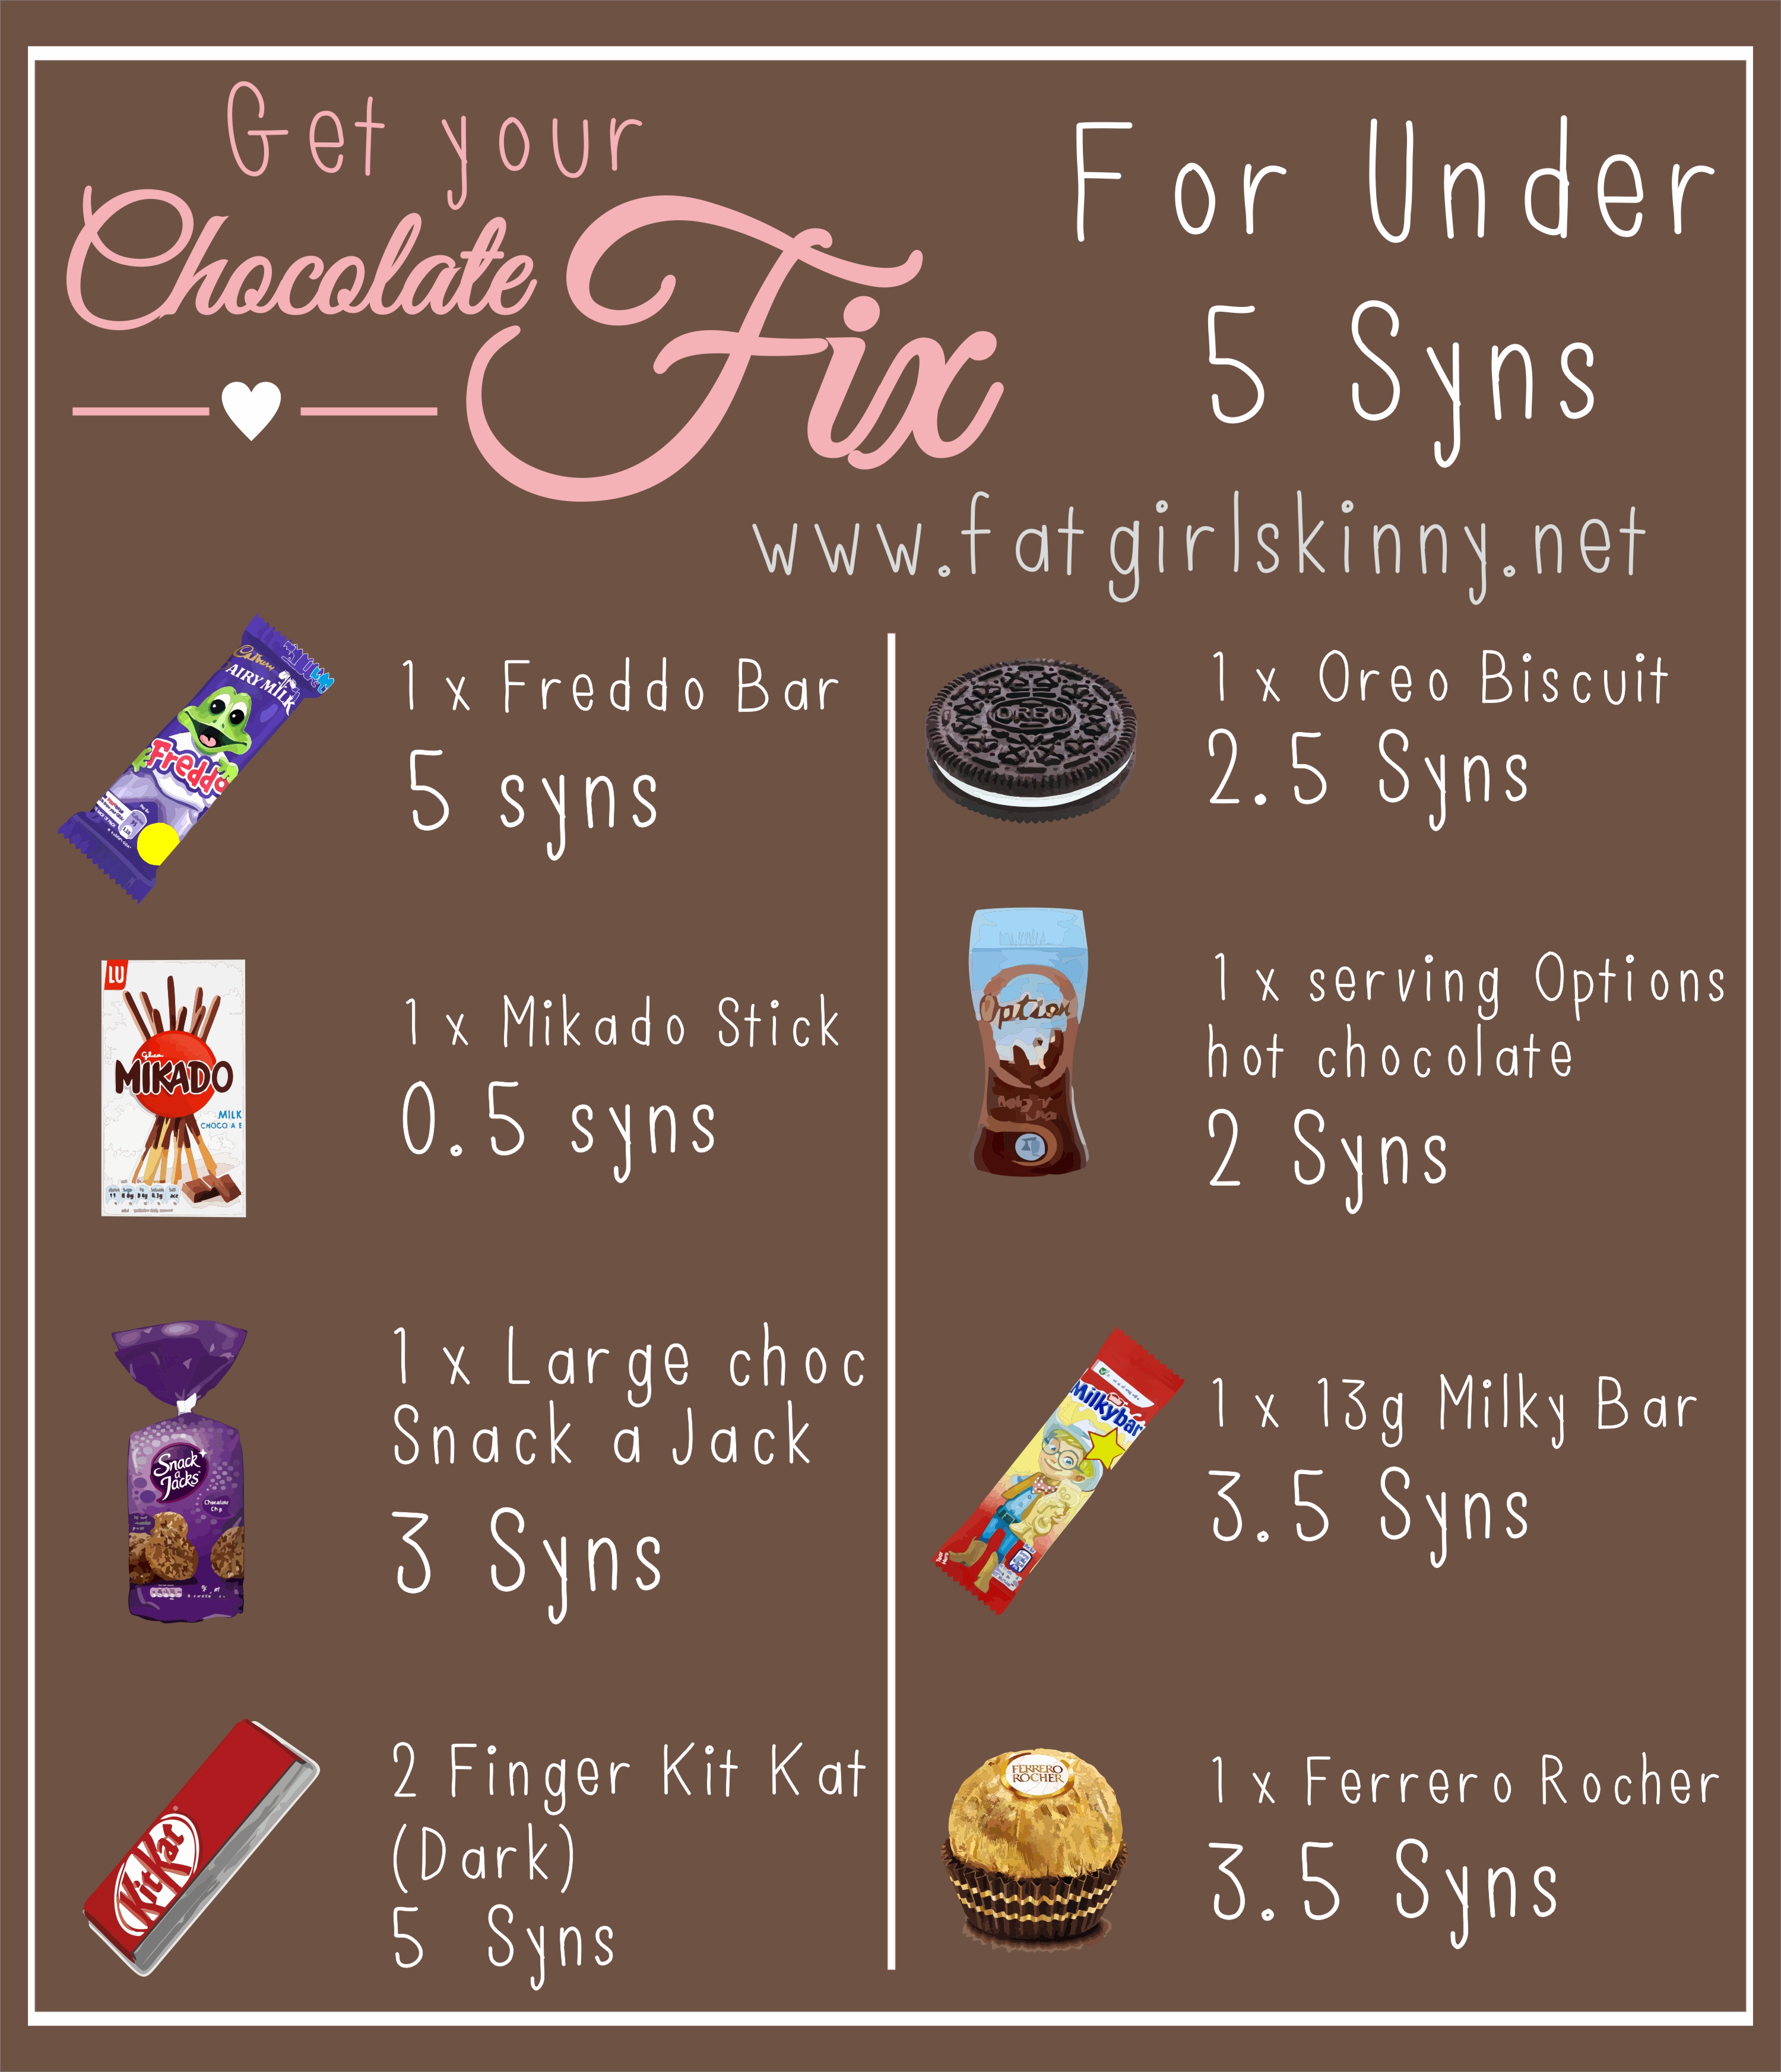 Chocolate Slimming World Friendly Guide 